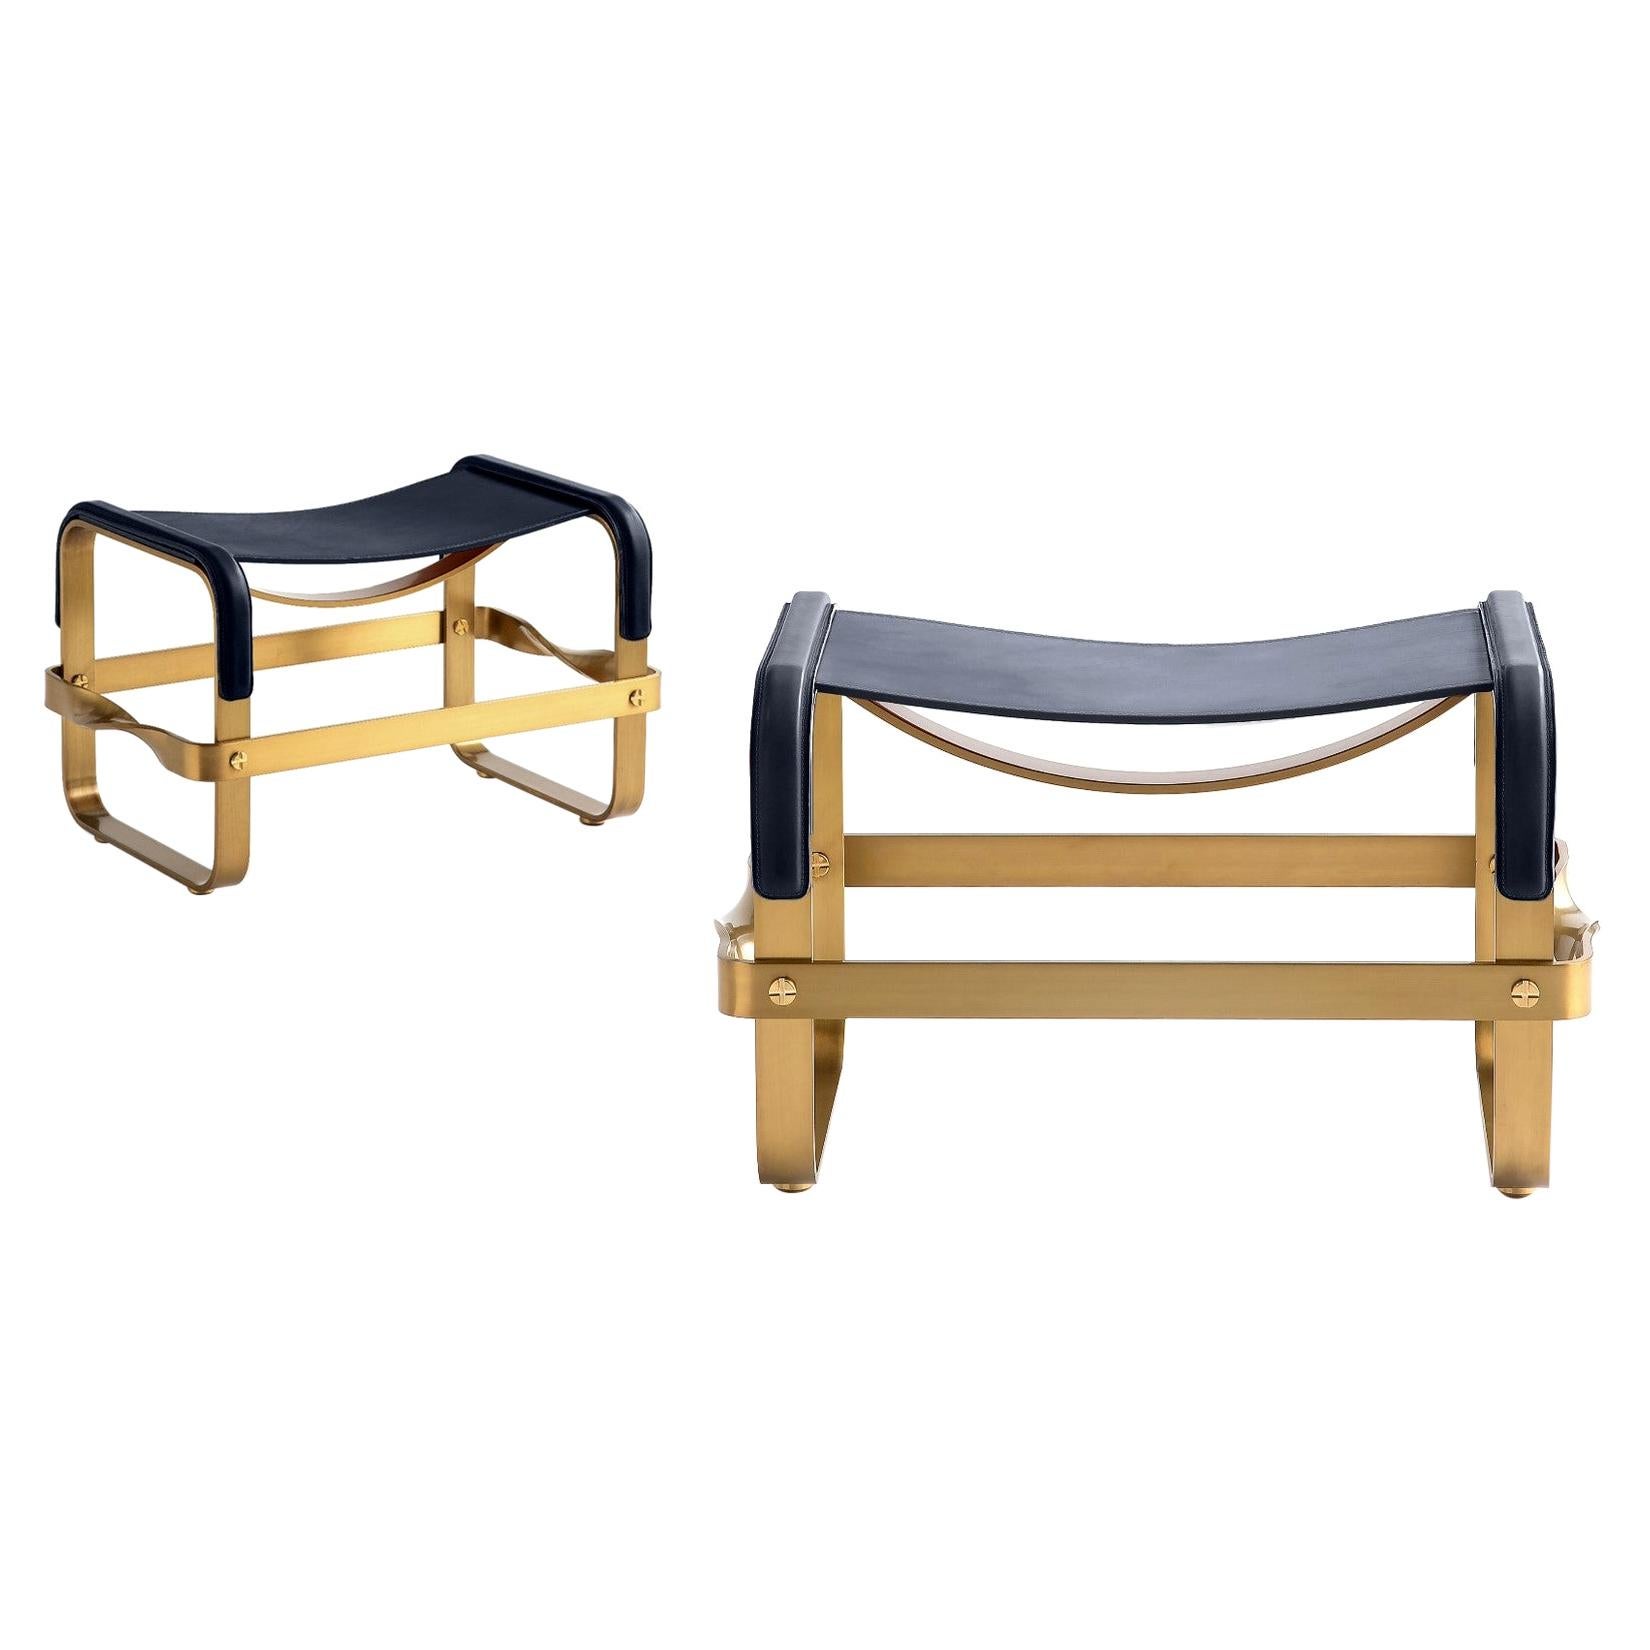 Set of 2 Footstool Aged Brass Steel & Navy Blue Leather Contemporary Style 